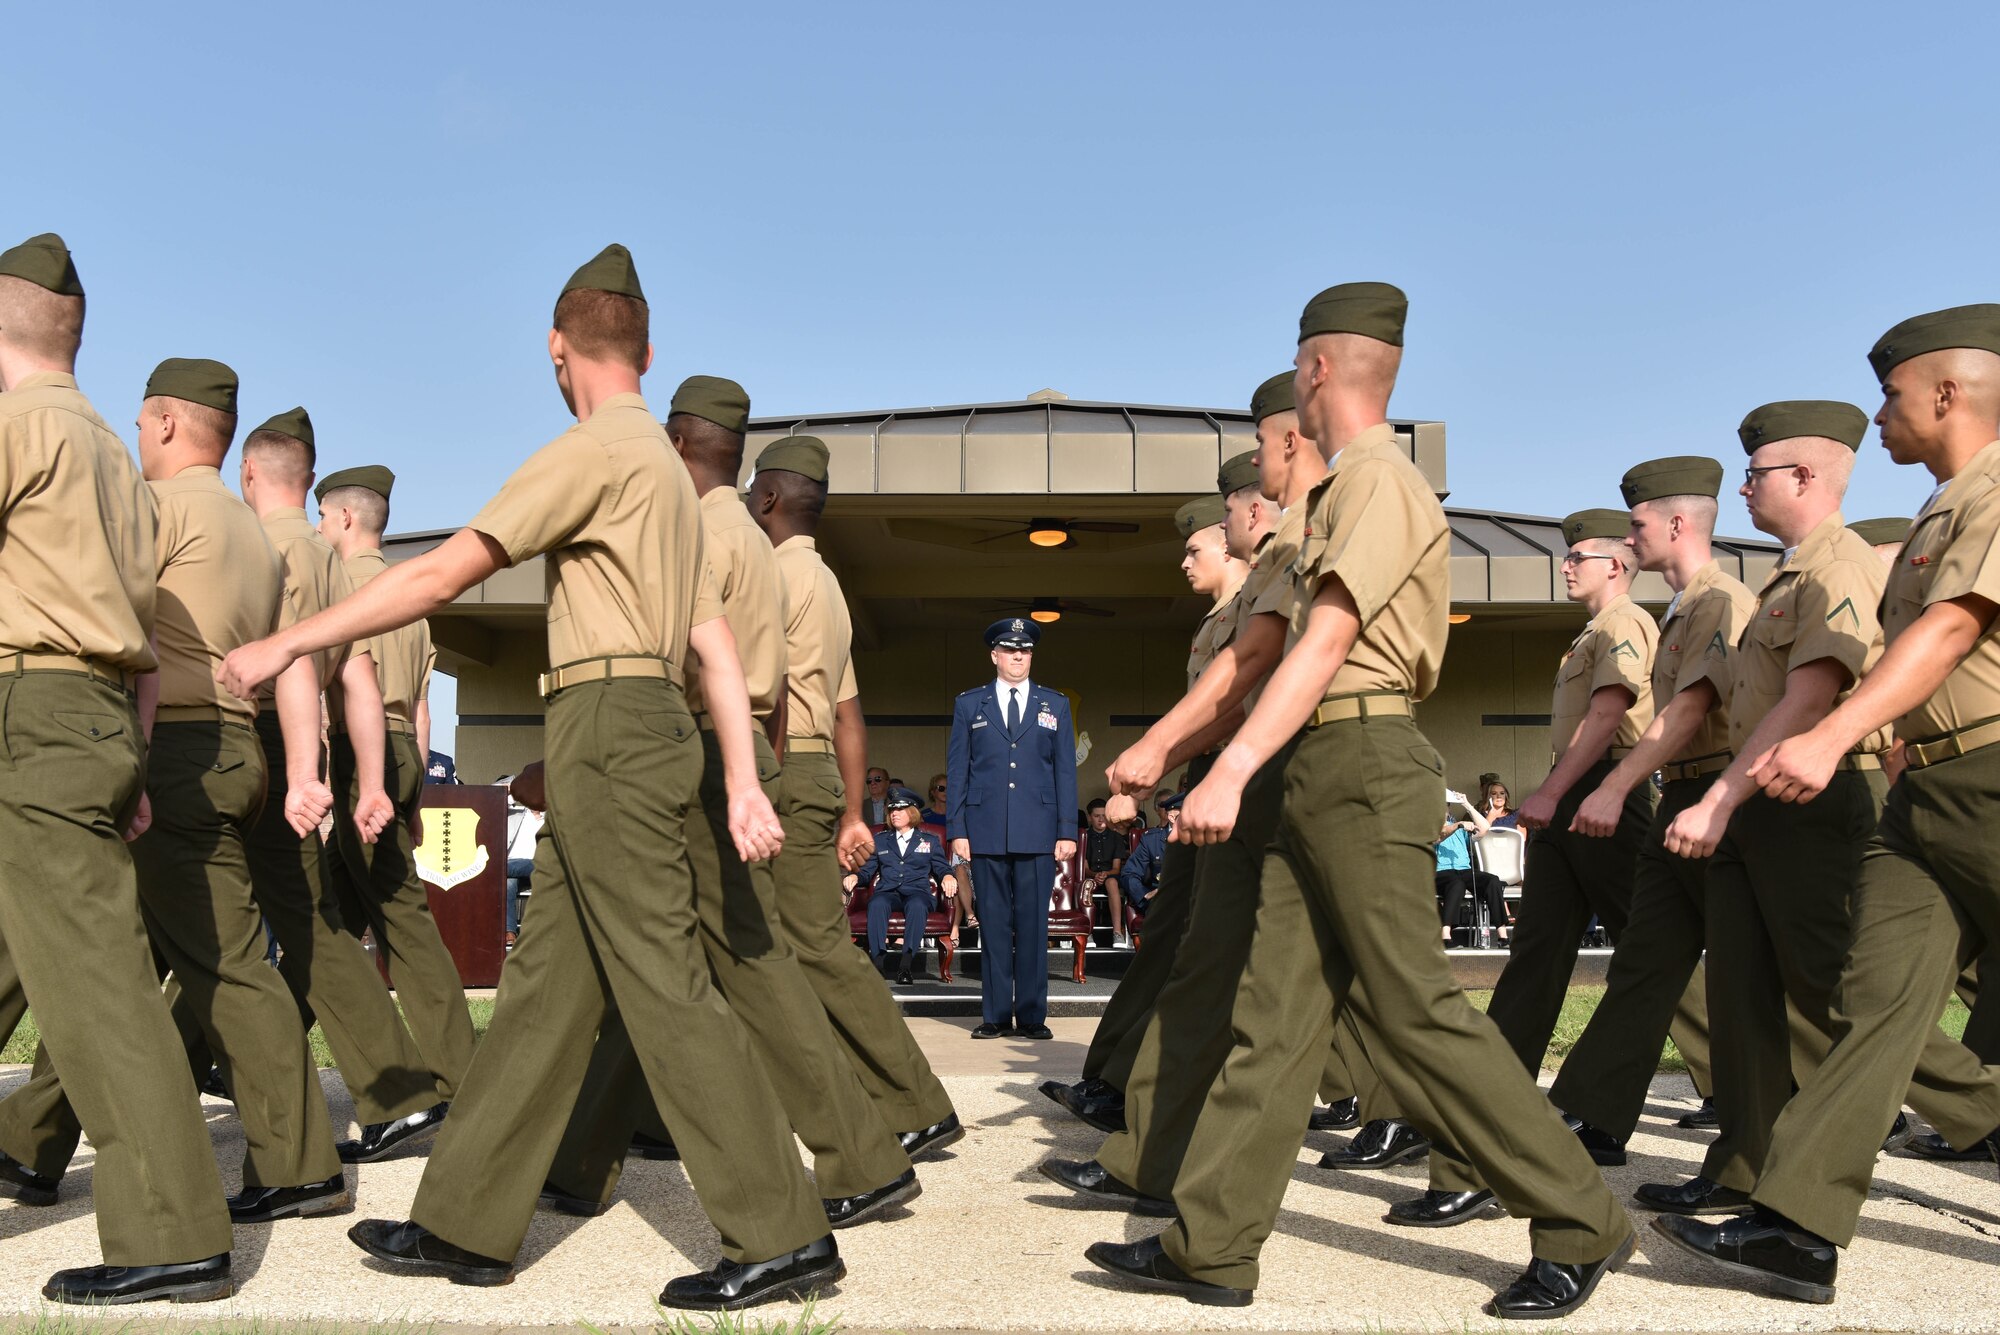 U.S. Air Force Col. Matthew Reilman, 17th Training Wing commander, reviews the formation during the pass in review portion of the 17th TRW change of command ceremony on Goodfellow Air Force Base, Texas, July 13, 2021. The pass in review was followed by the Armed Forces Medley which signified the ending of the change of command ceremony. (U.S. Air Force photo by Senior Airman Jermaine Ayers)